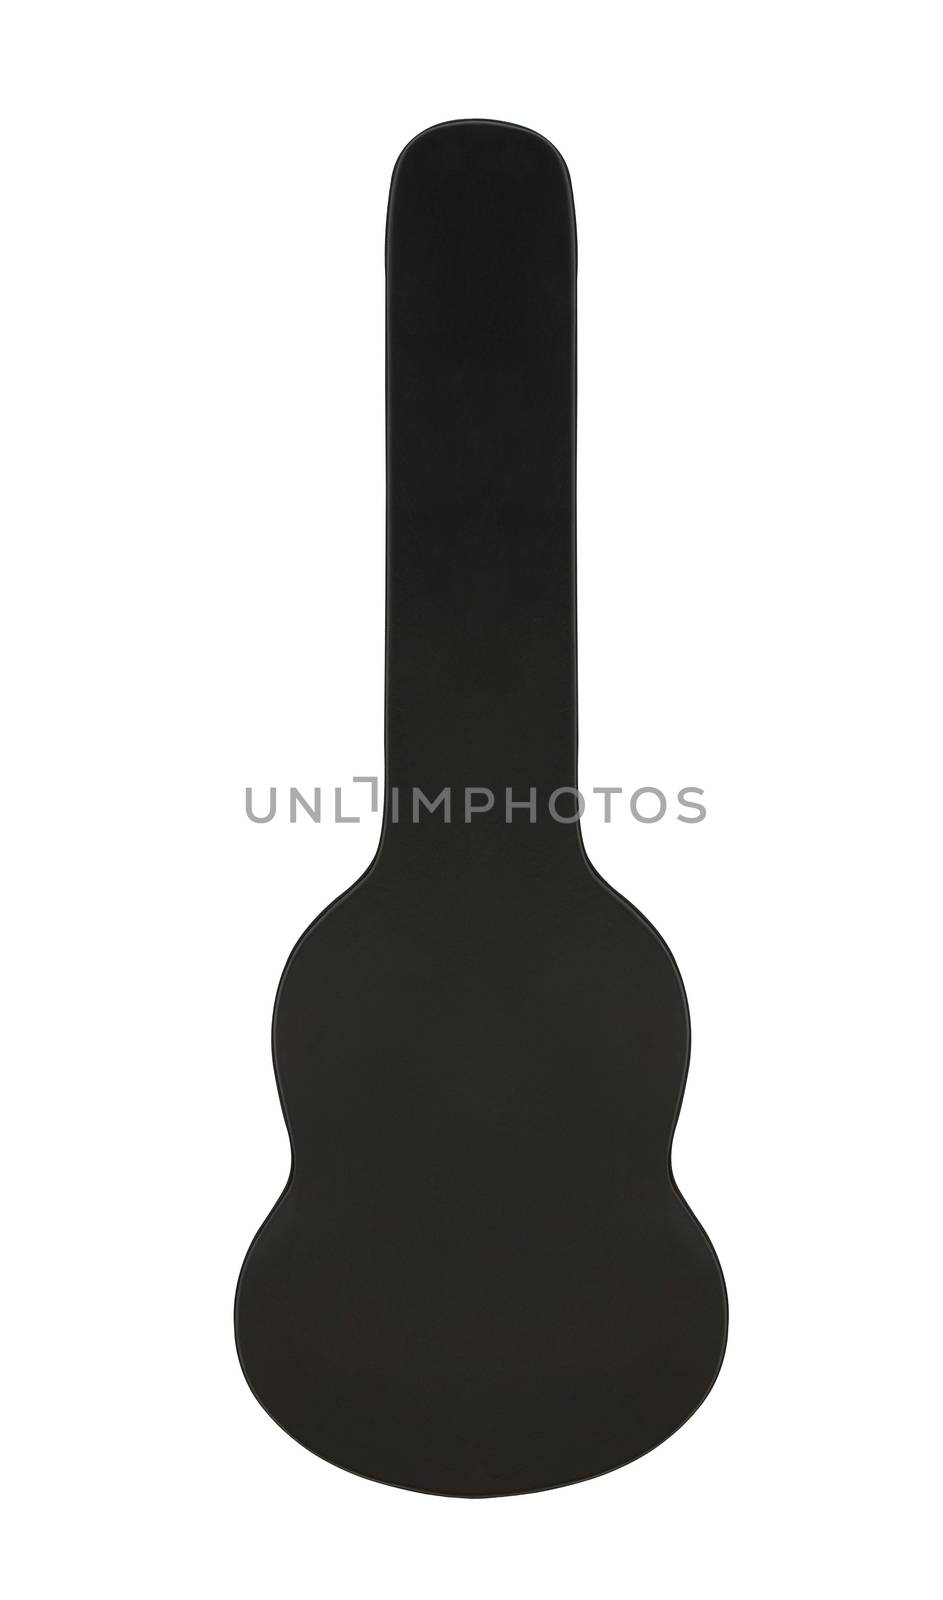 The Old Guitar case on white background